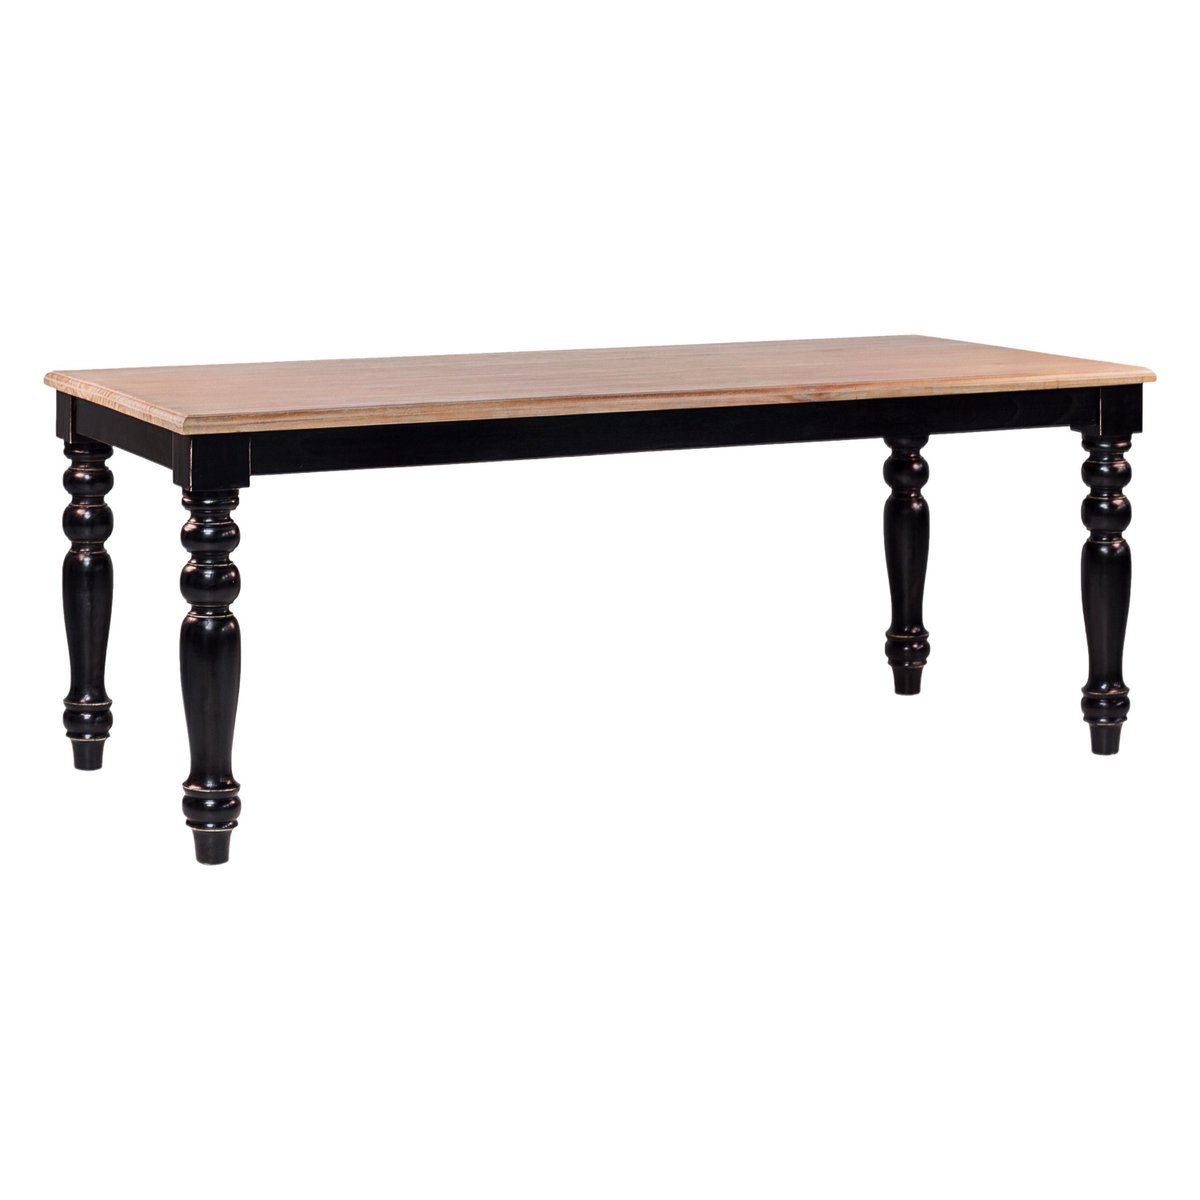 french provincial style dining room table with black ebonized legs 1 PSK-1002447